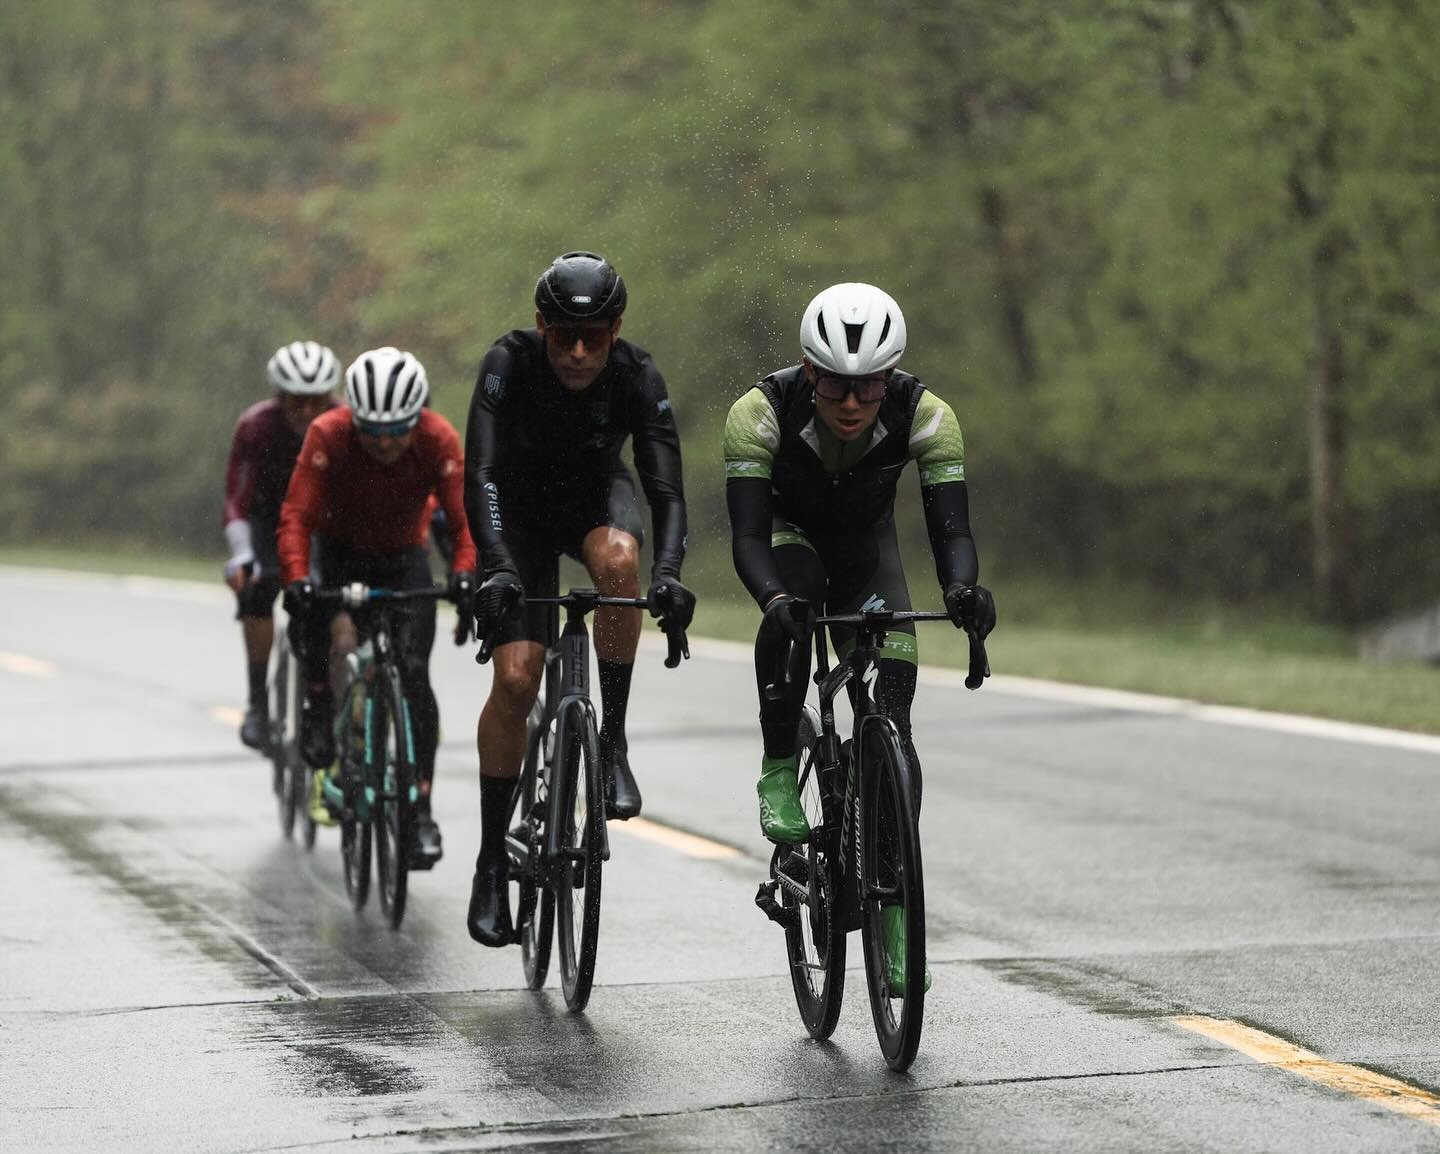 We will sadly not be holding our Wednesday Night Ride tonight - too wet outside. We think Michael and others are still drying off from this past weekend&rsquo;s Bear Mountain Classic - it was an epic one. We&rsquo;ll see you all next week!

On the to